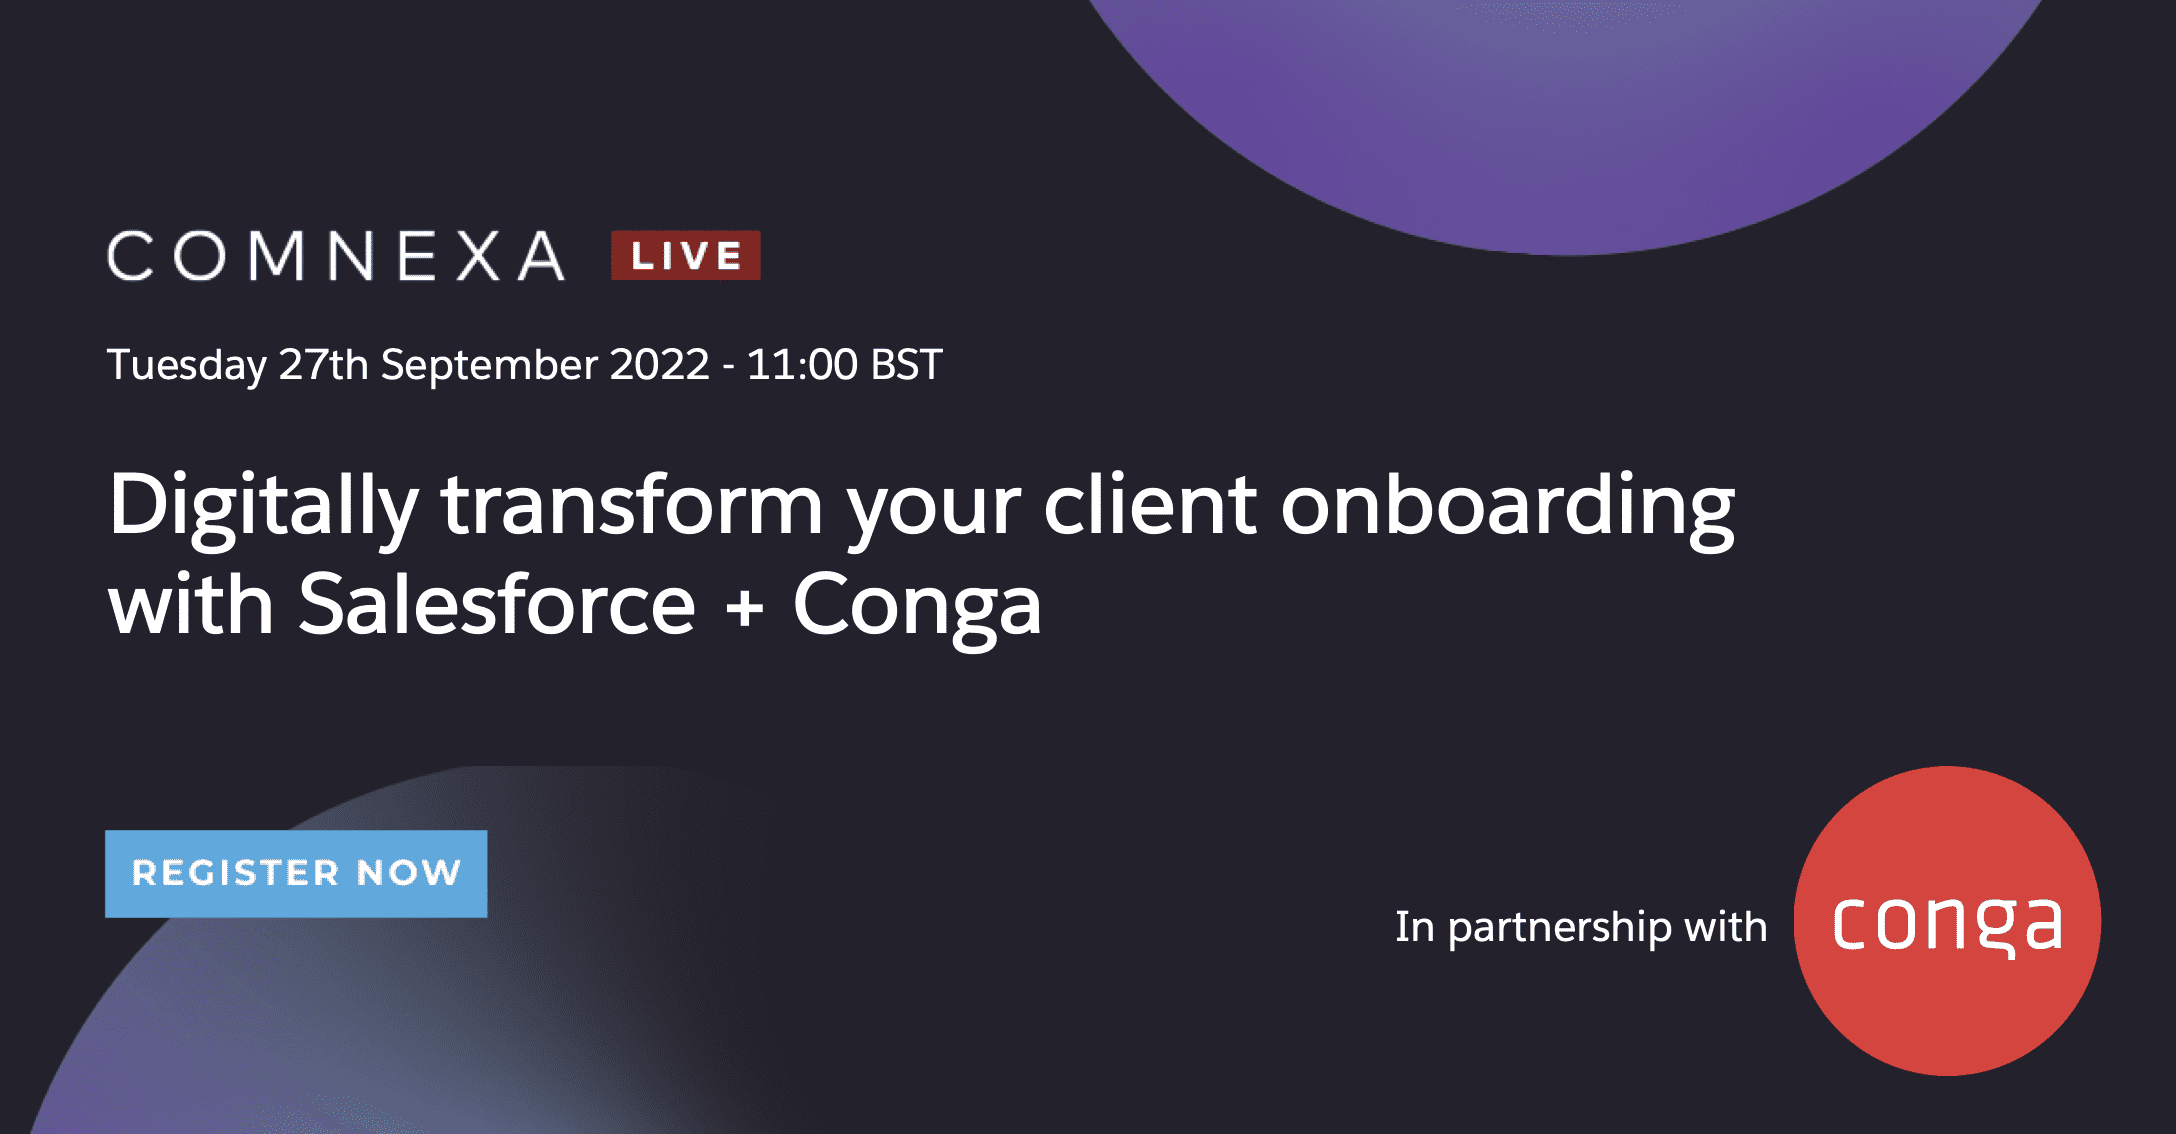 Digitally transform your client onboarding with Salesforce + Conga